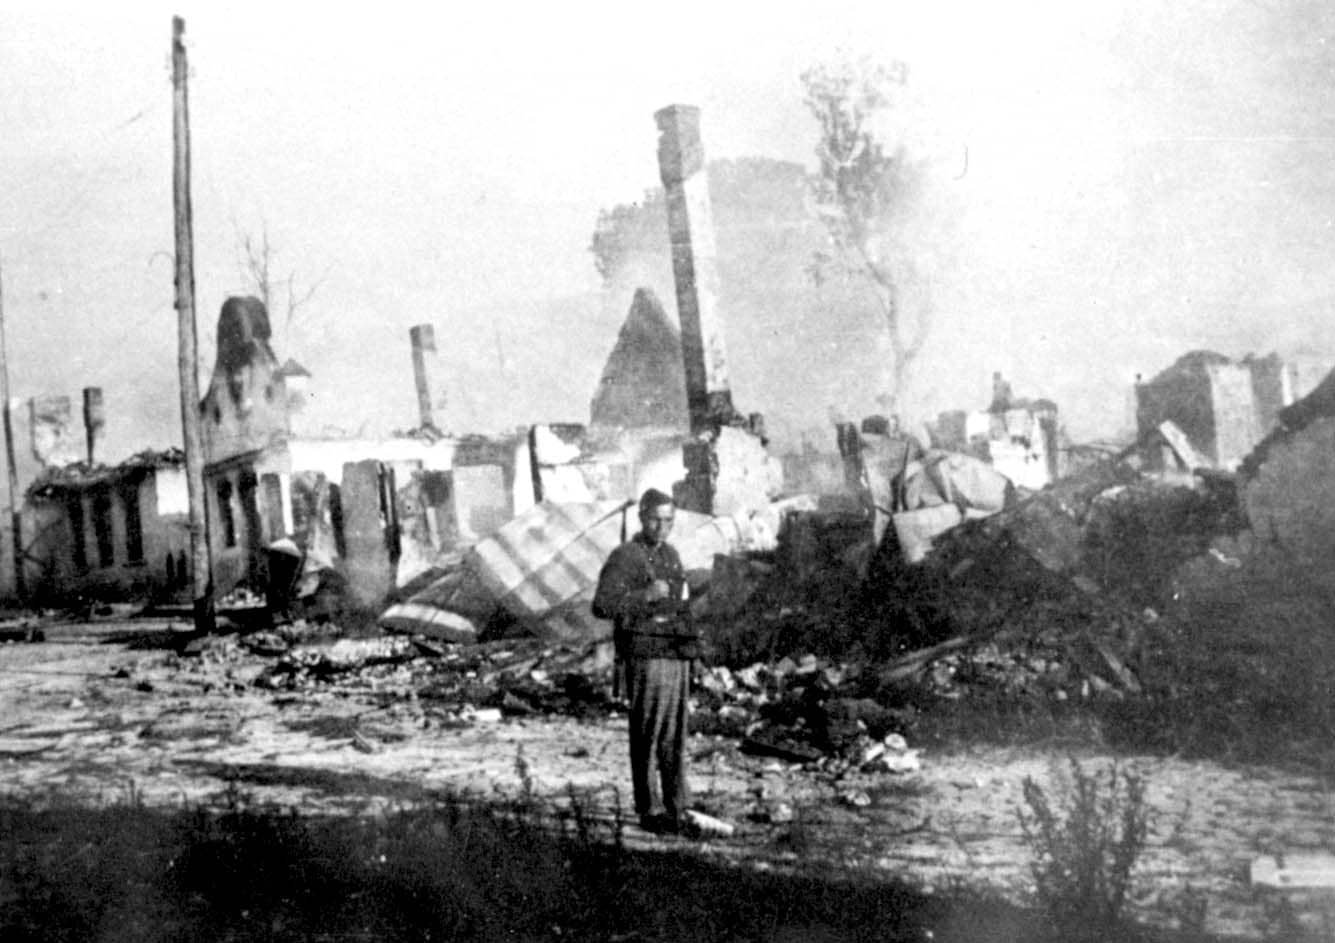 Ruins of the town's synagogue burned down by the Germans in early September 1941